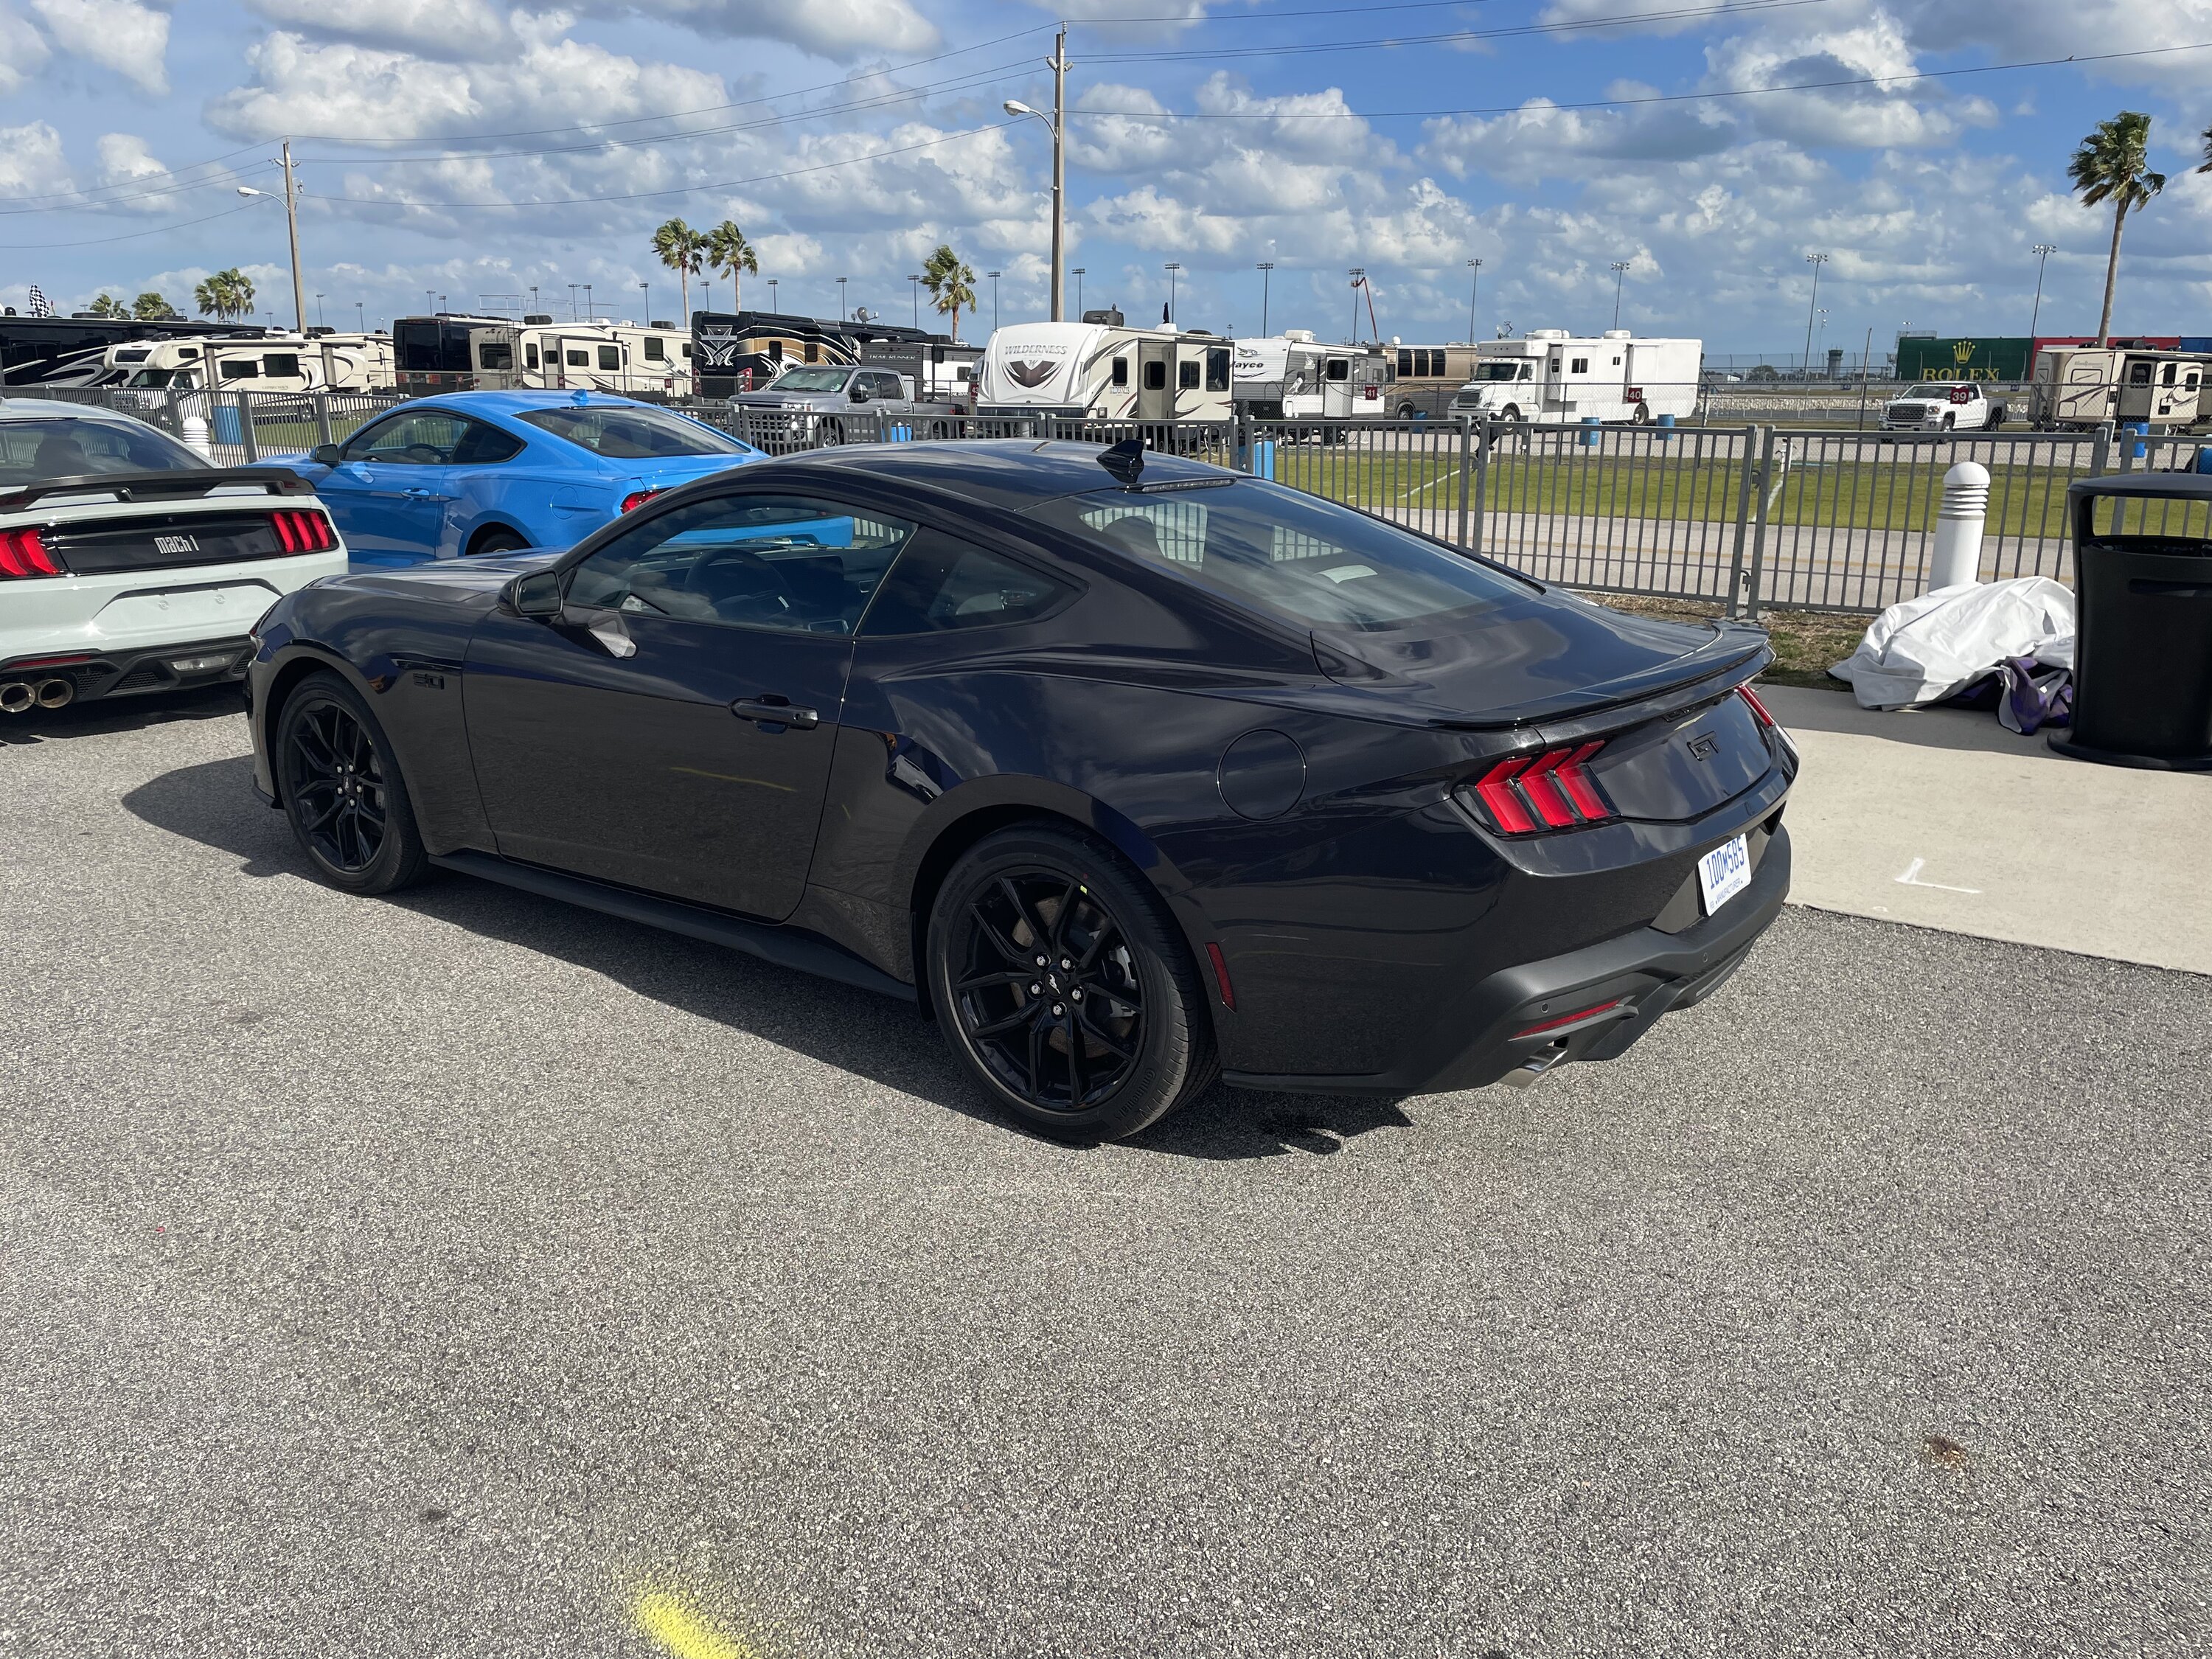 S650 Mustang S650 vs S550 real life side by side comparison look (rear view) 7A303723-7373-405A-8BE1-FA9902DB7662